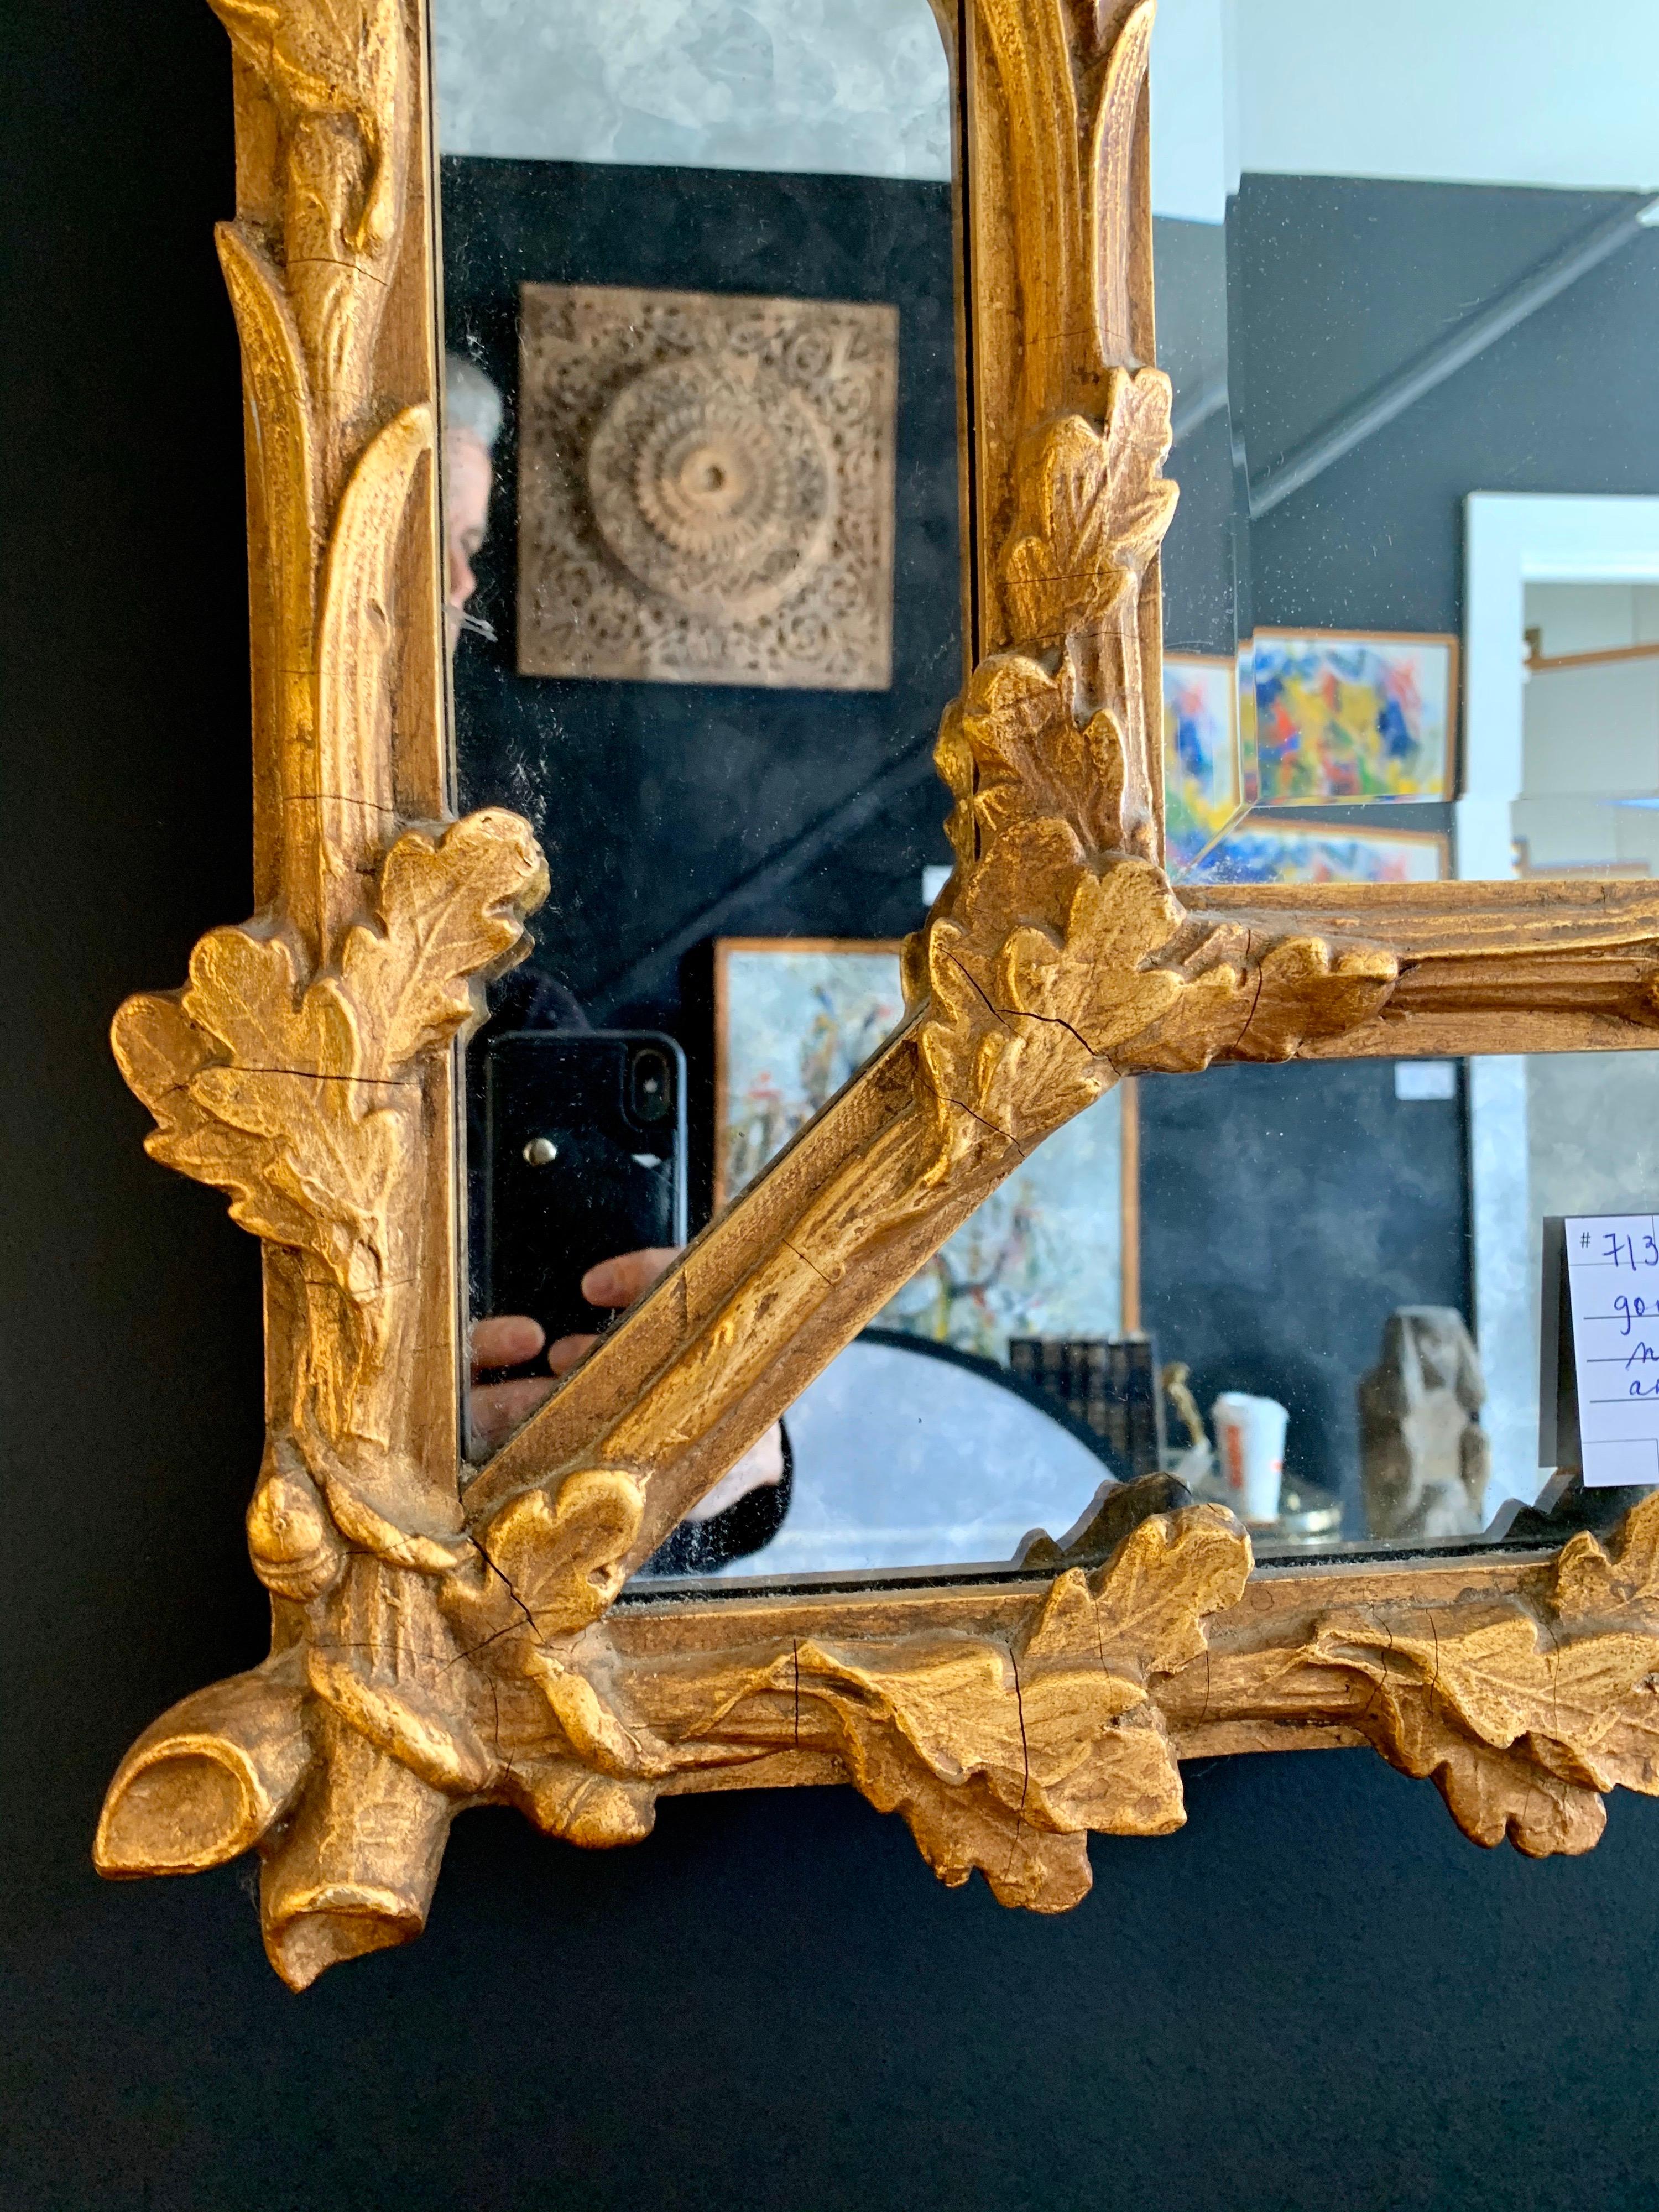 A very fine Florentine giltwood carved mirror framed with carved branches of oak leaves and acorns scrolled on borders and centered with a beveled mirror plate and a border of smoked glass. Quite stunning, indeed.